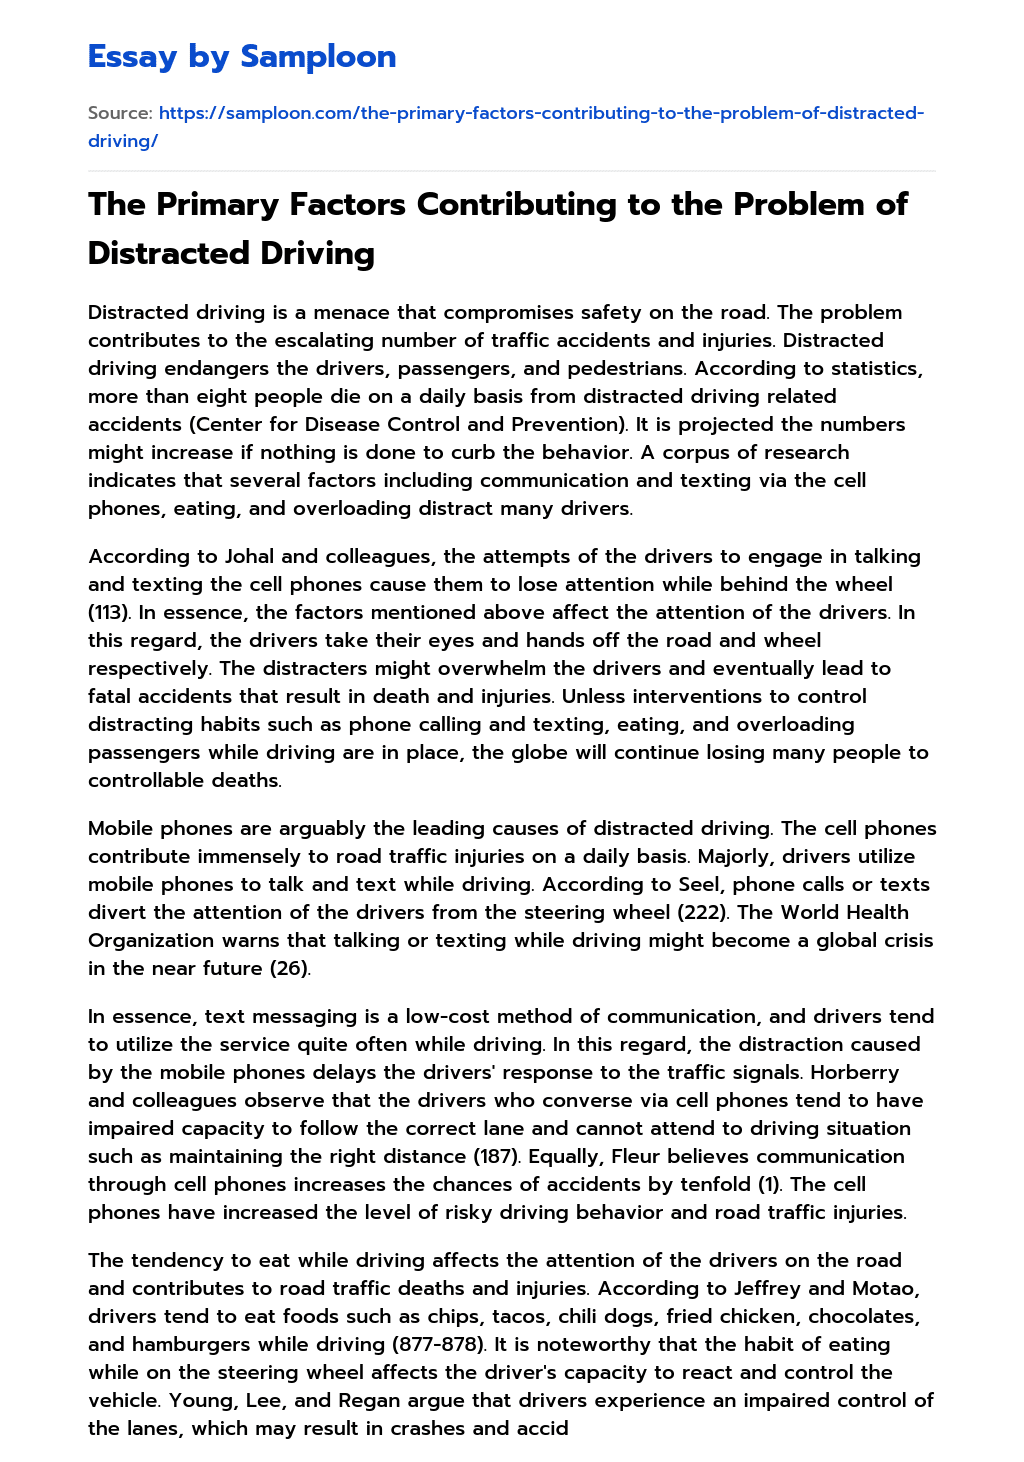 The Primary Factors Contributing to the Problem of Distracted Driving essay